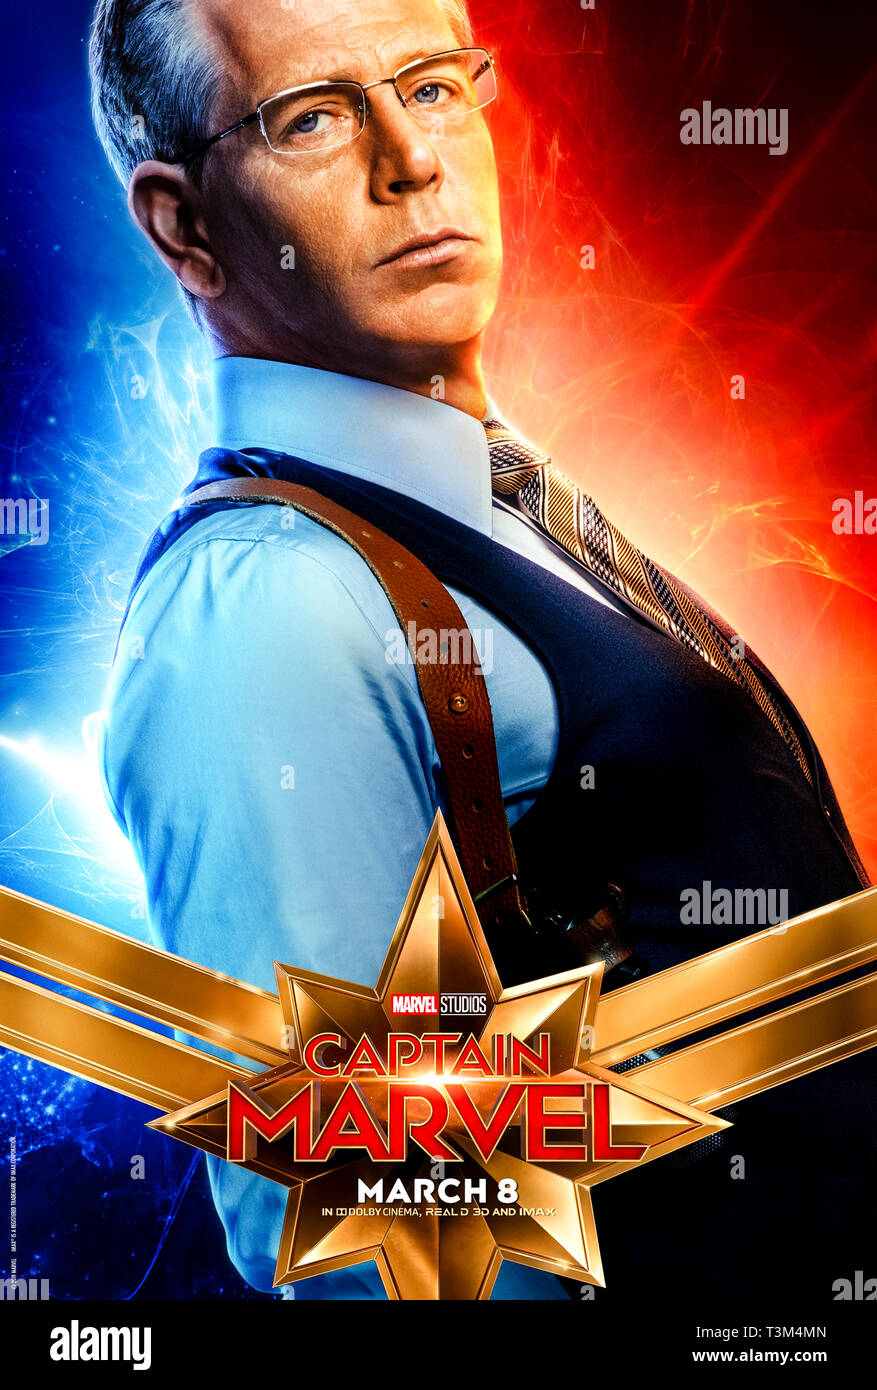 Captain Marvel (2019) directed by Anna Boden and Ryan Fleck and starring Brie Larson, Ben Mendelsohn and Samuel L. Jackson. USAF pilot Carol Danvers becomes one of the most powerful superheros in the universe. Stock Photo